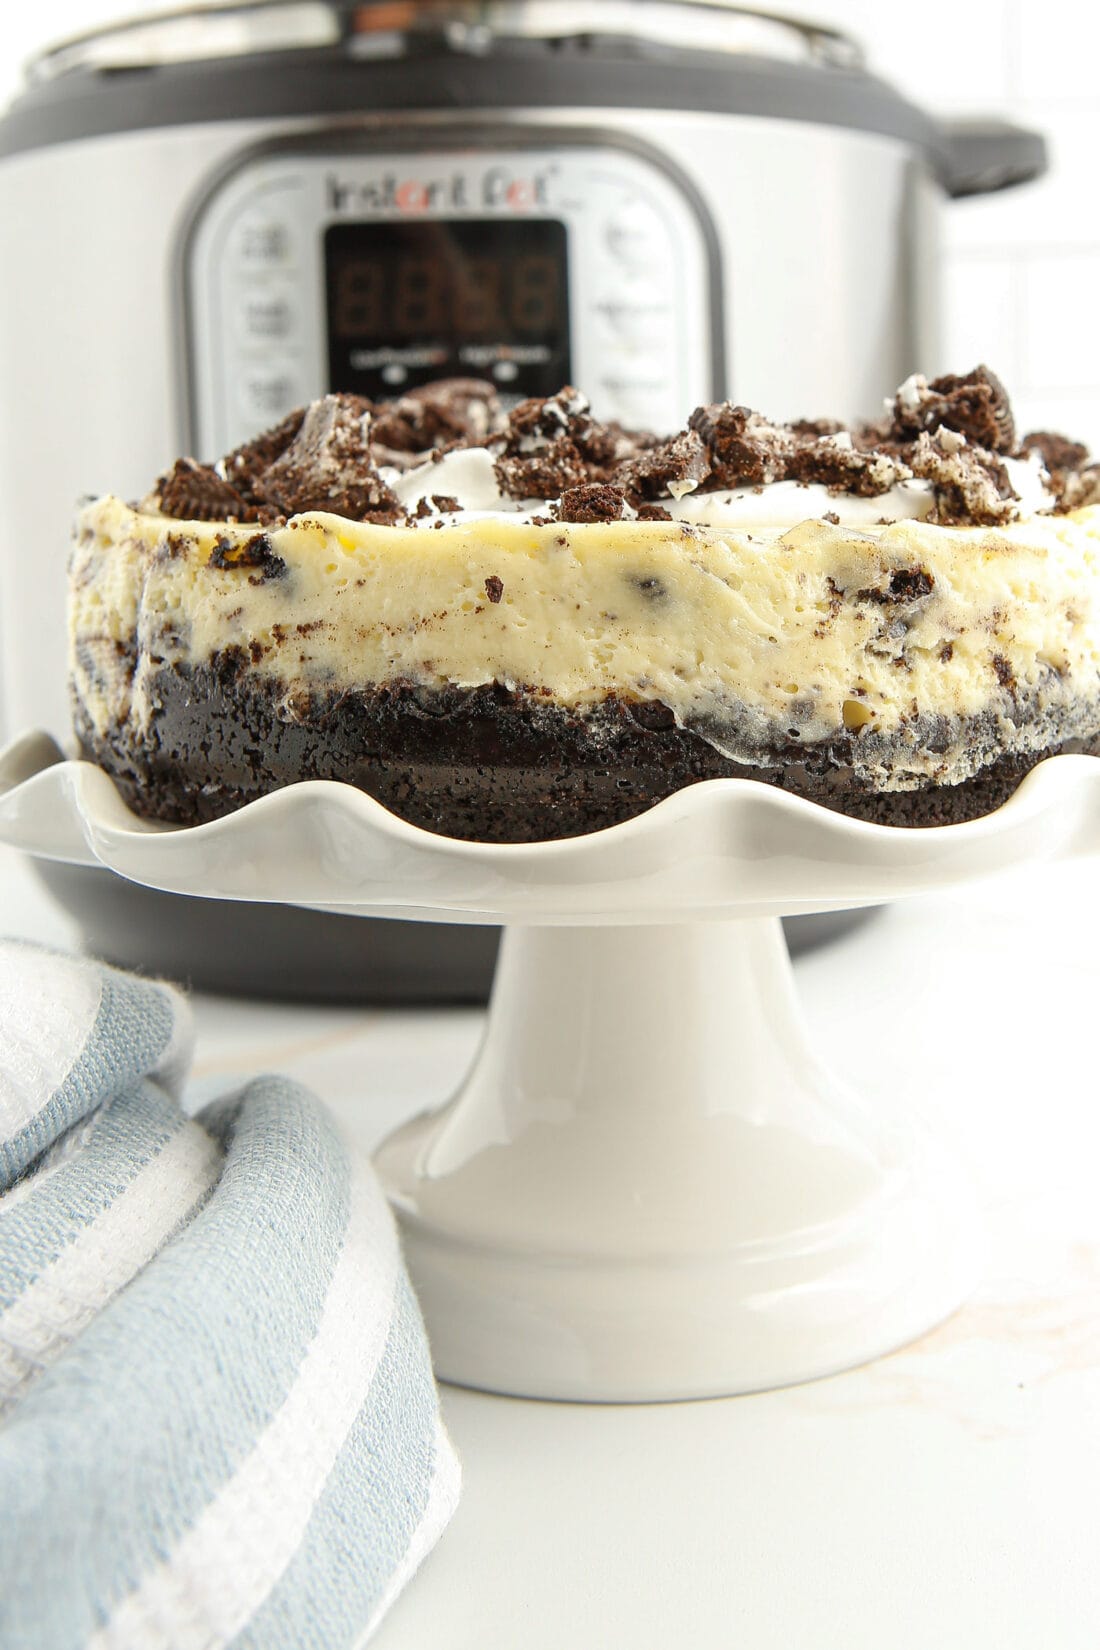 Instant Pot Oreo Cheesecake on a cake plate with IP in background